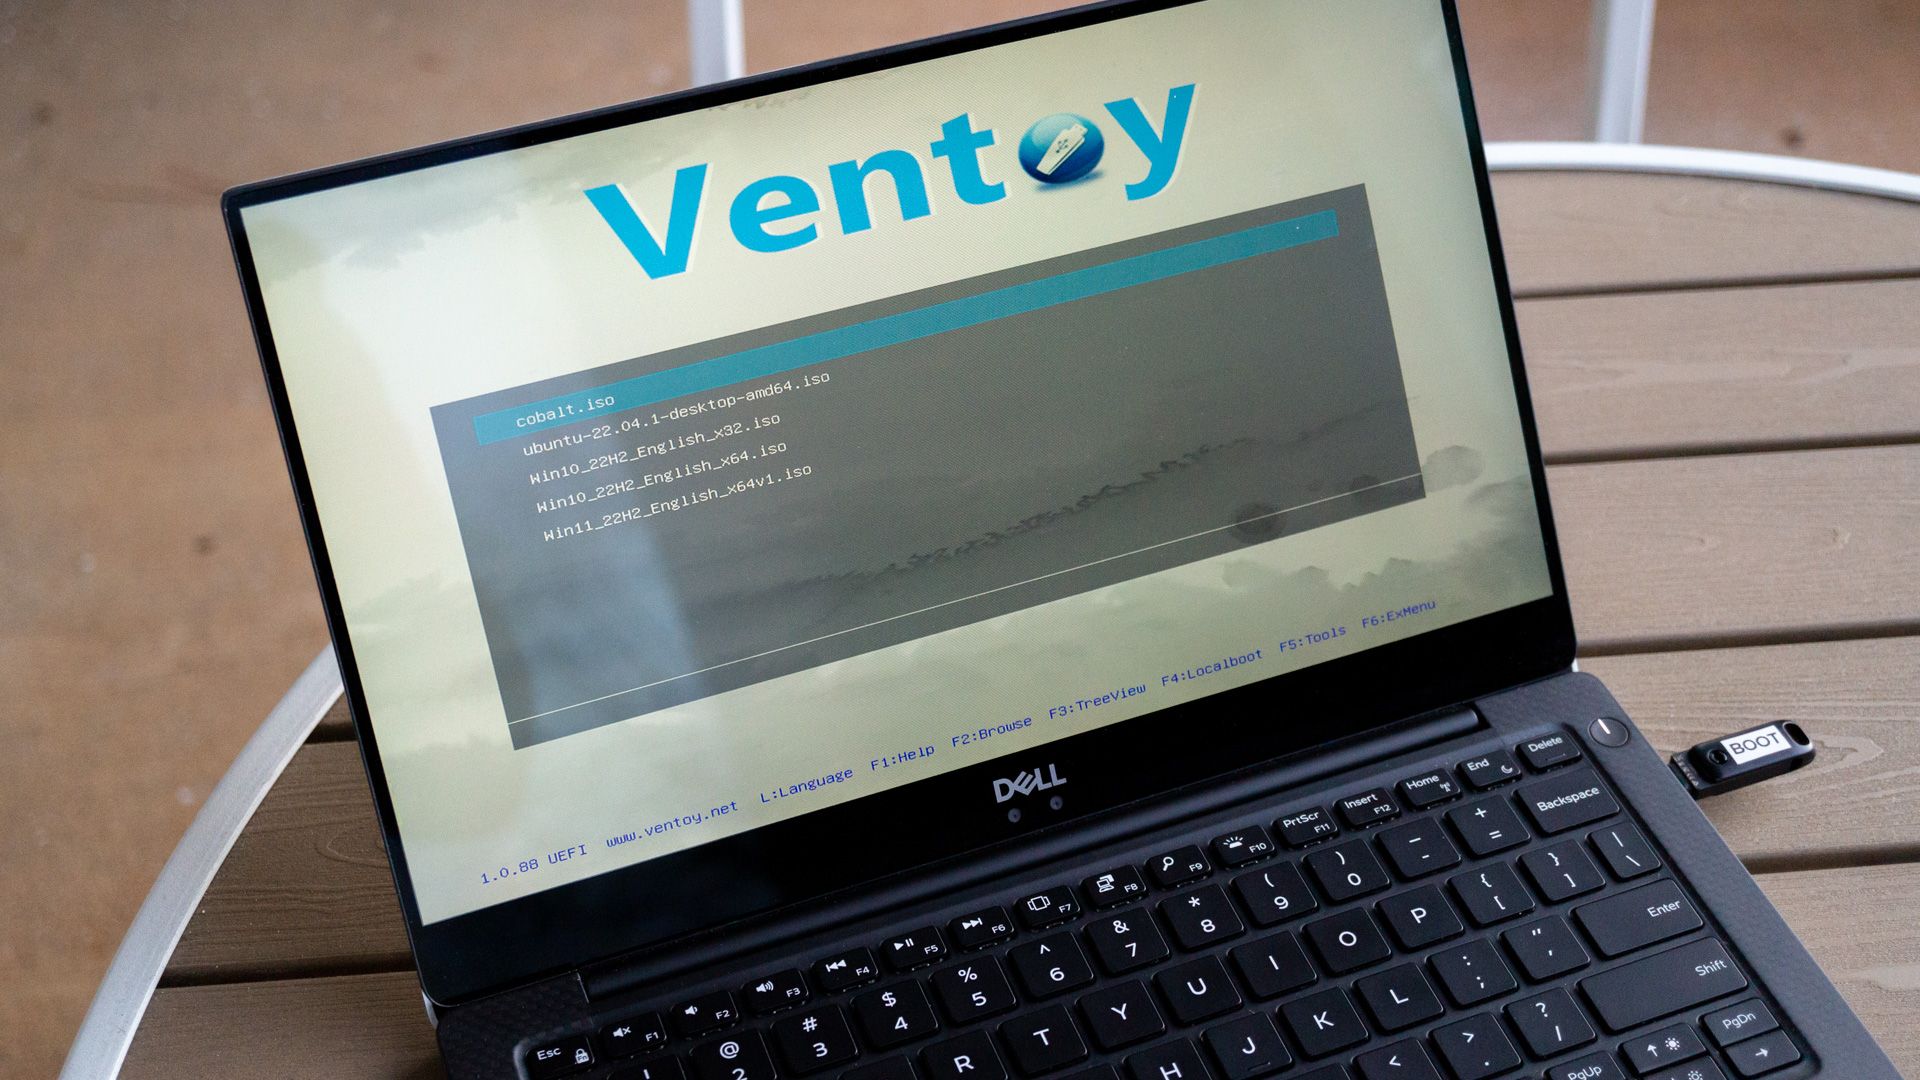 Ventoy boot screen